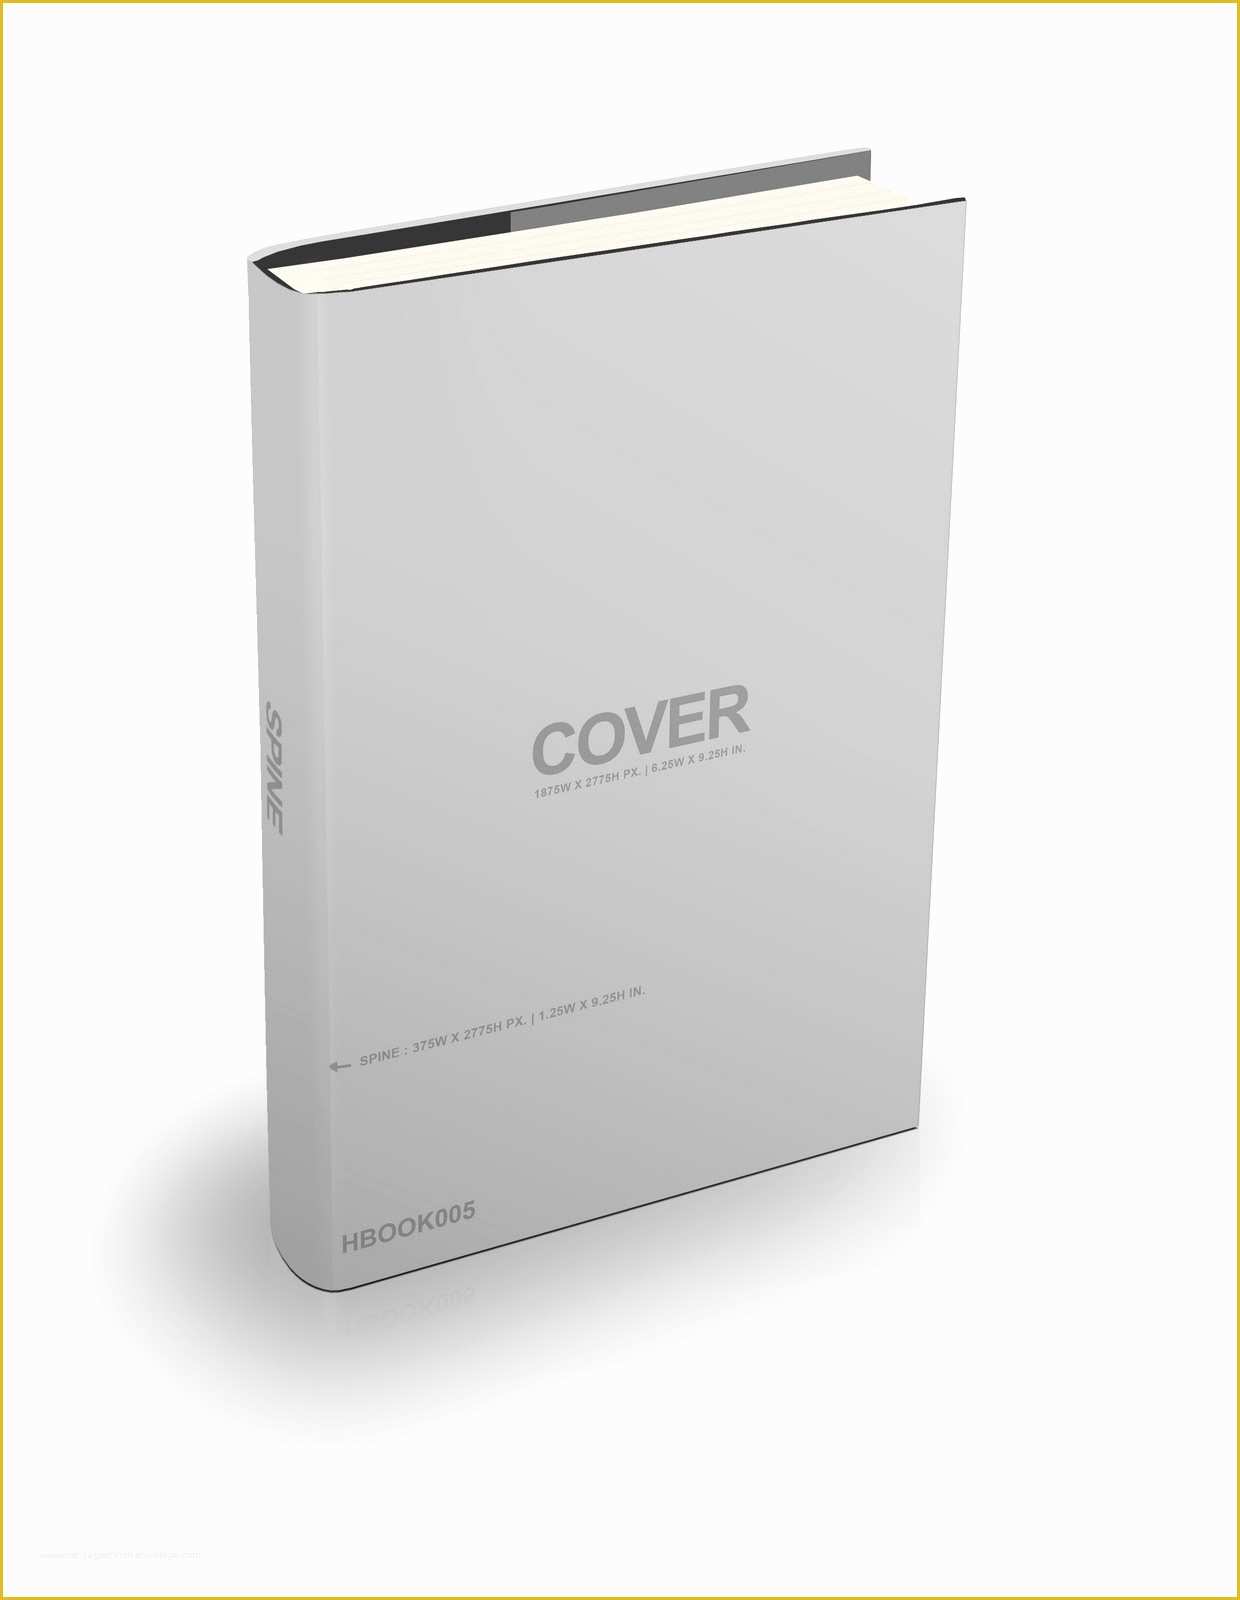 Free 3d Ebook Cover Templates Of Velocity Ebook Covers Ebook Hardcover Templates